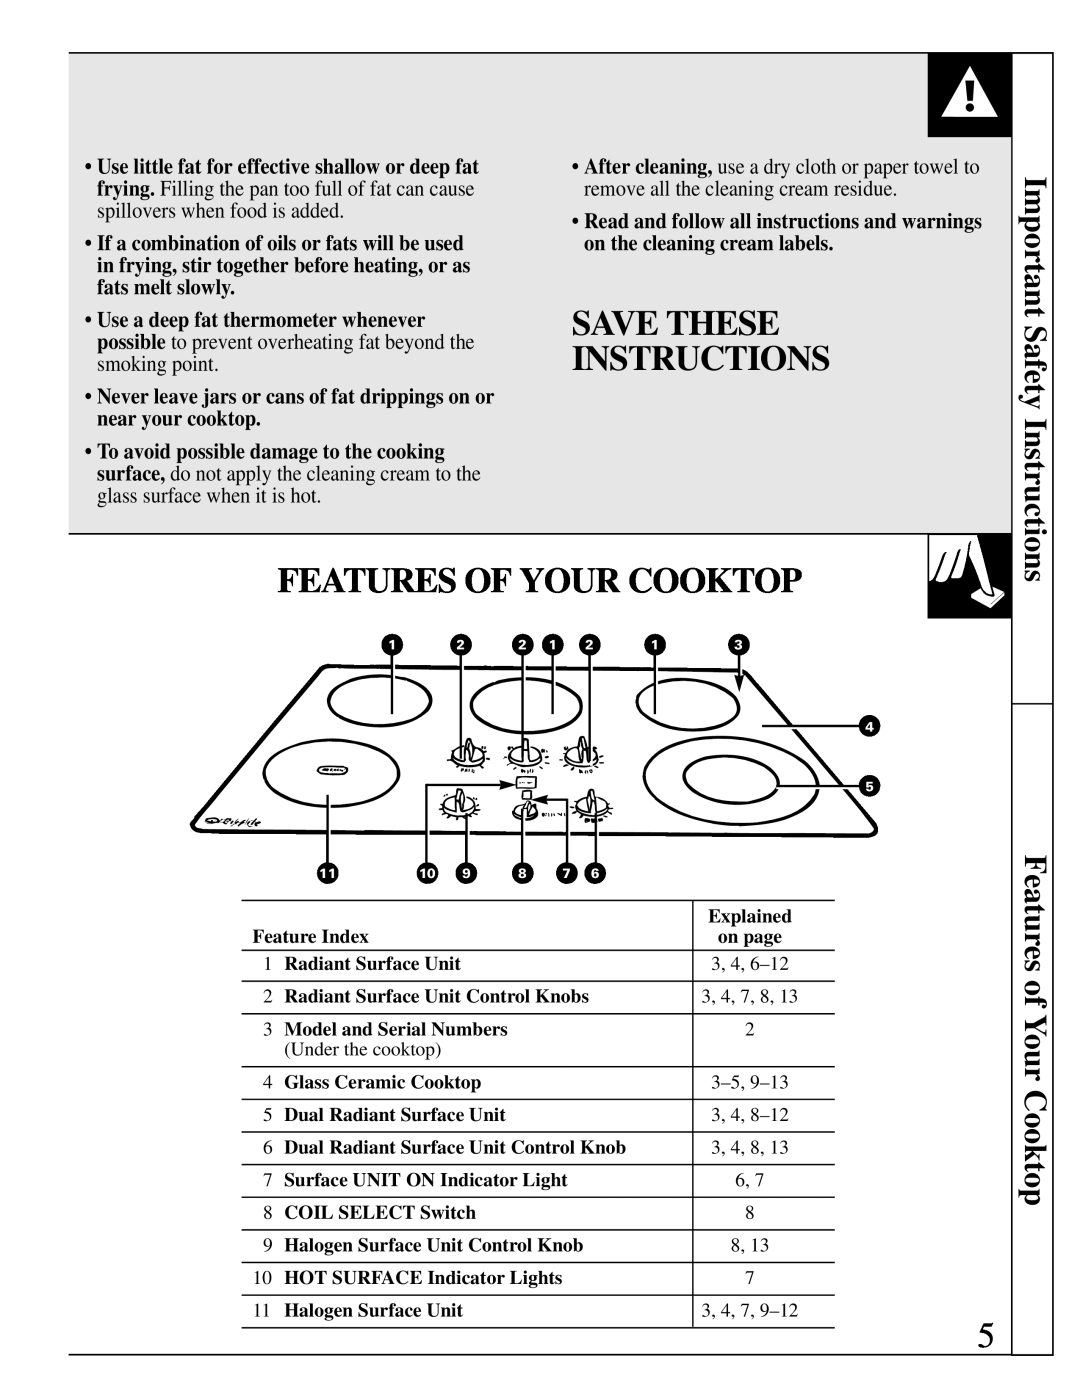 GE 164D2966P161-1, JP660 operating instructions Save These Instructions, Features Of Your Cooktop, Features of Your Cooktop 